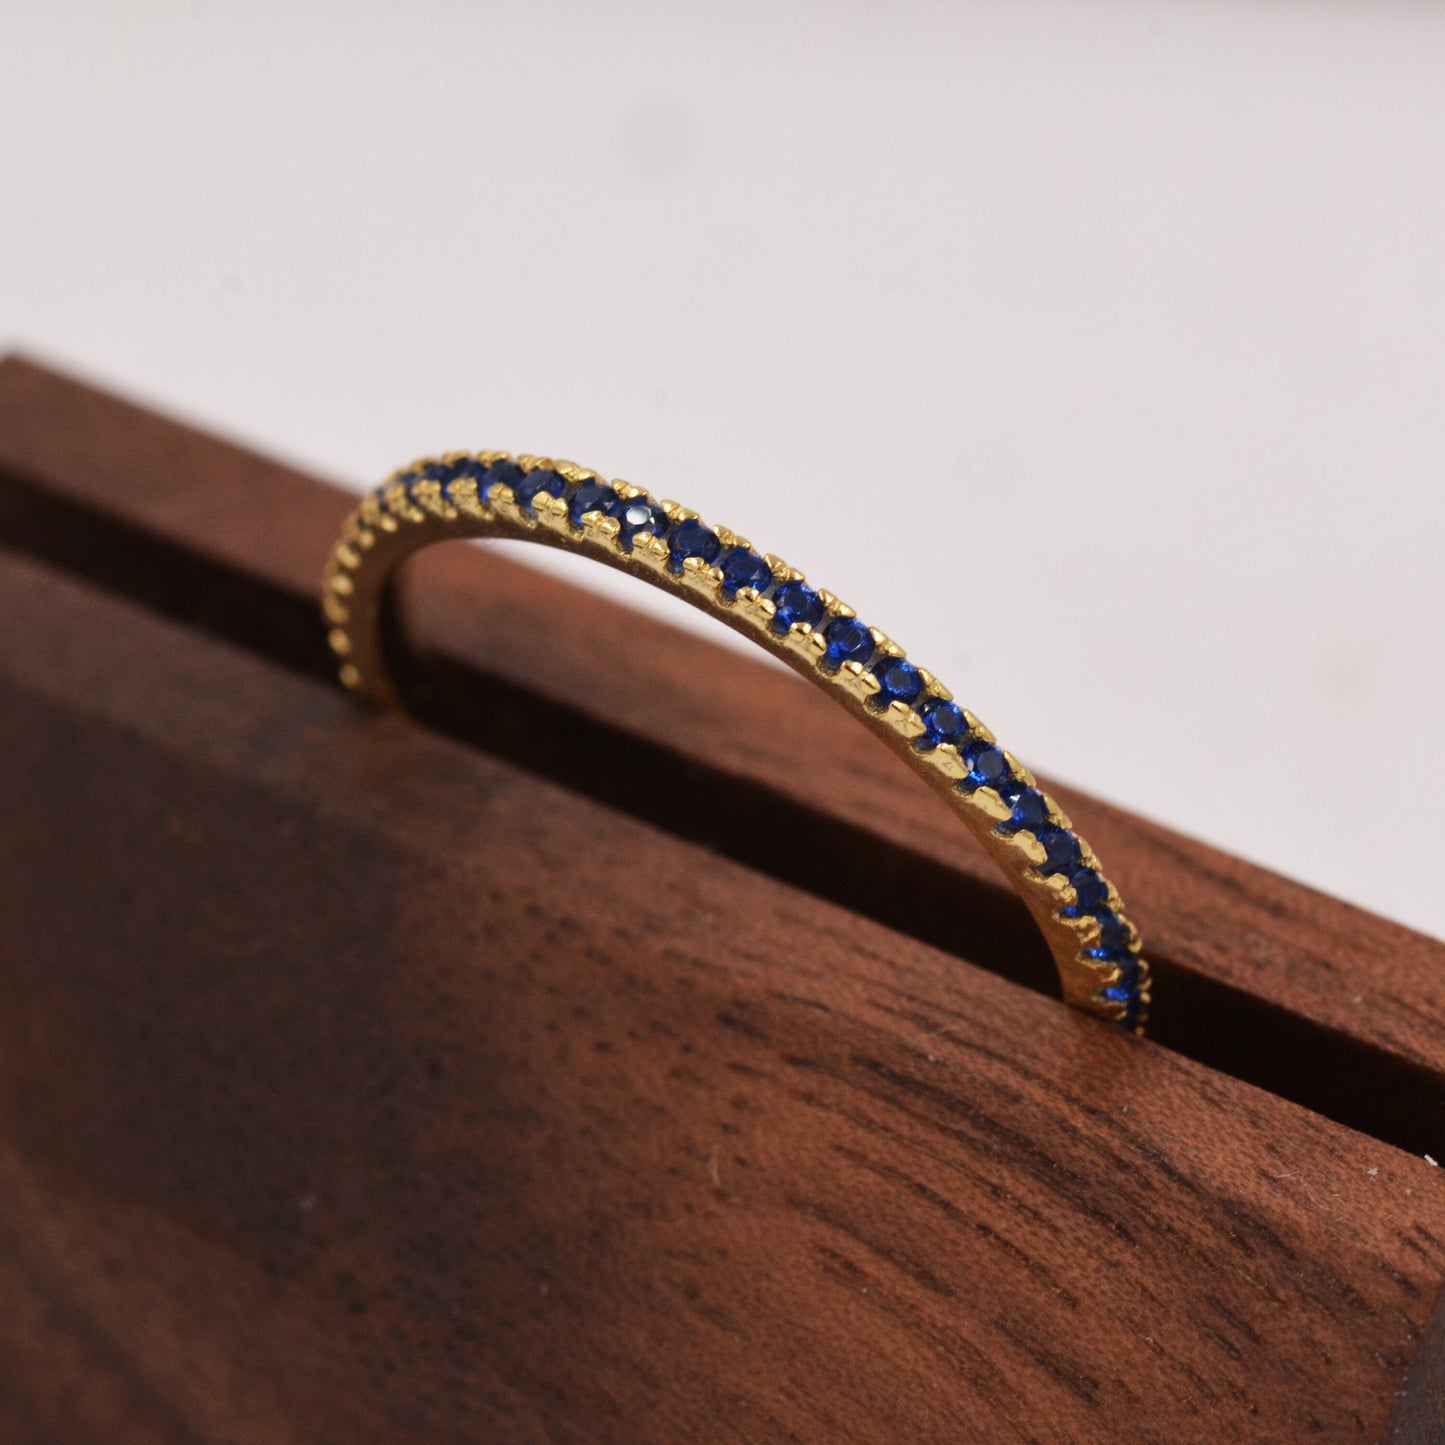 Sapphire Skinny Crystal Band Ring in Sterling Silver, Gold Vermeil Crystal Pave Ring, Stacking Rings, US 5 - 8